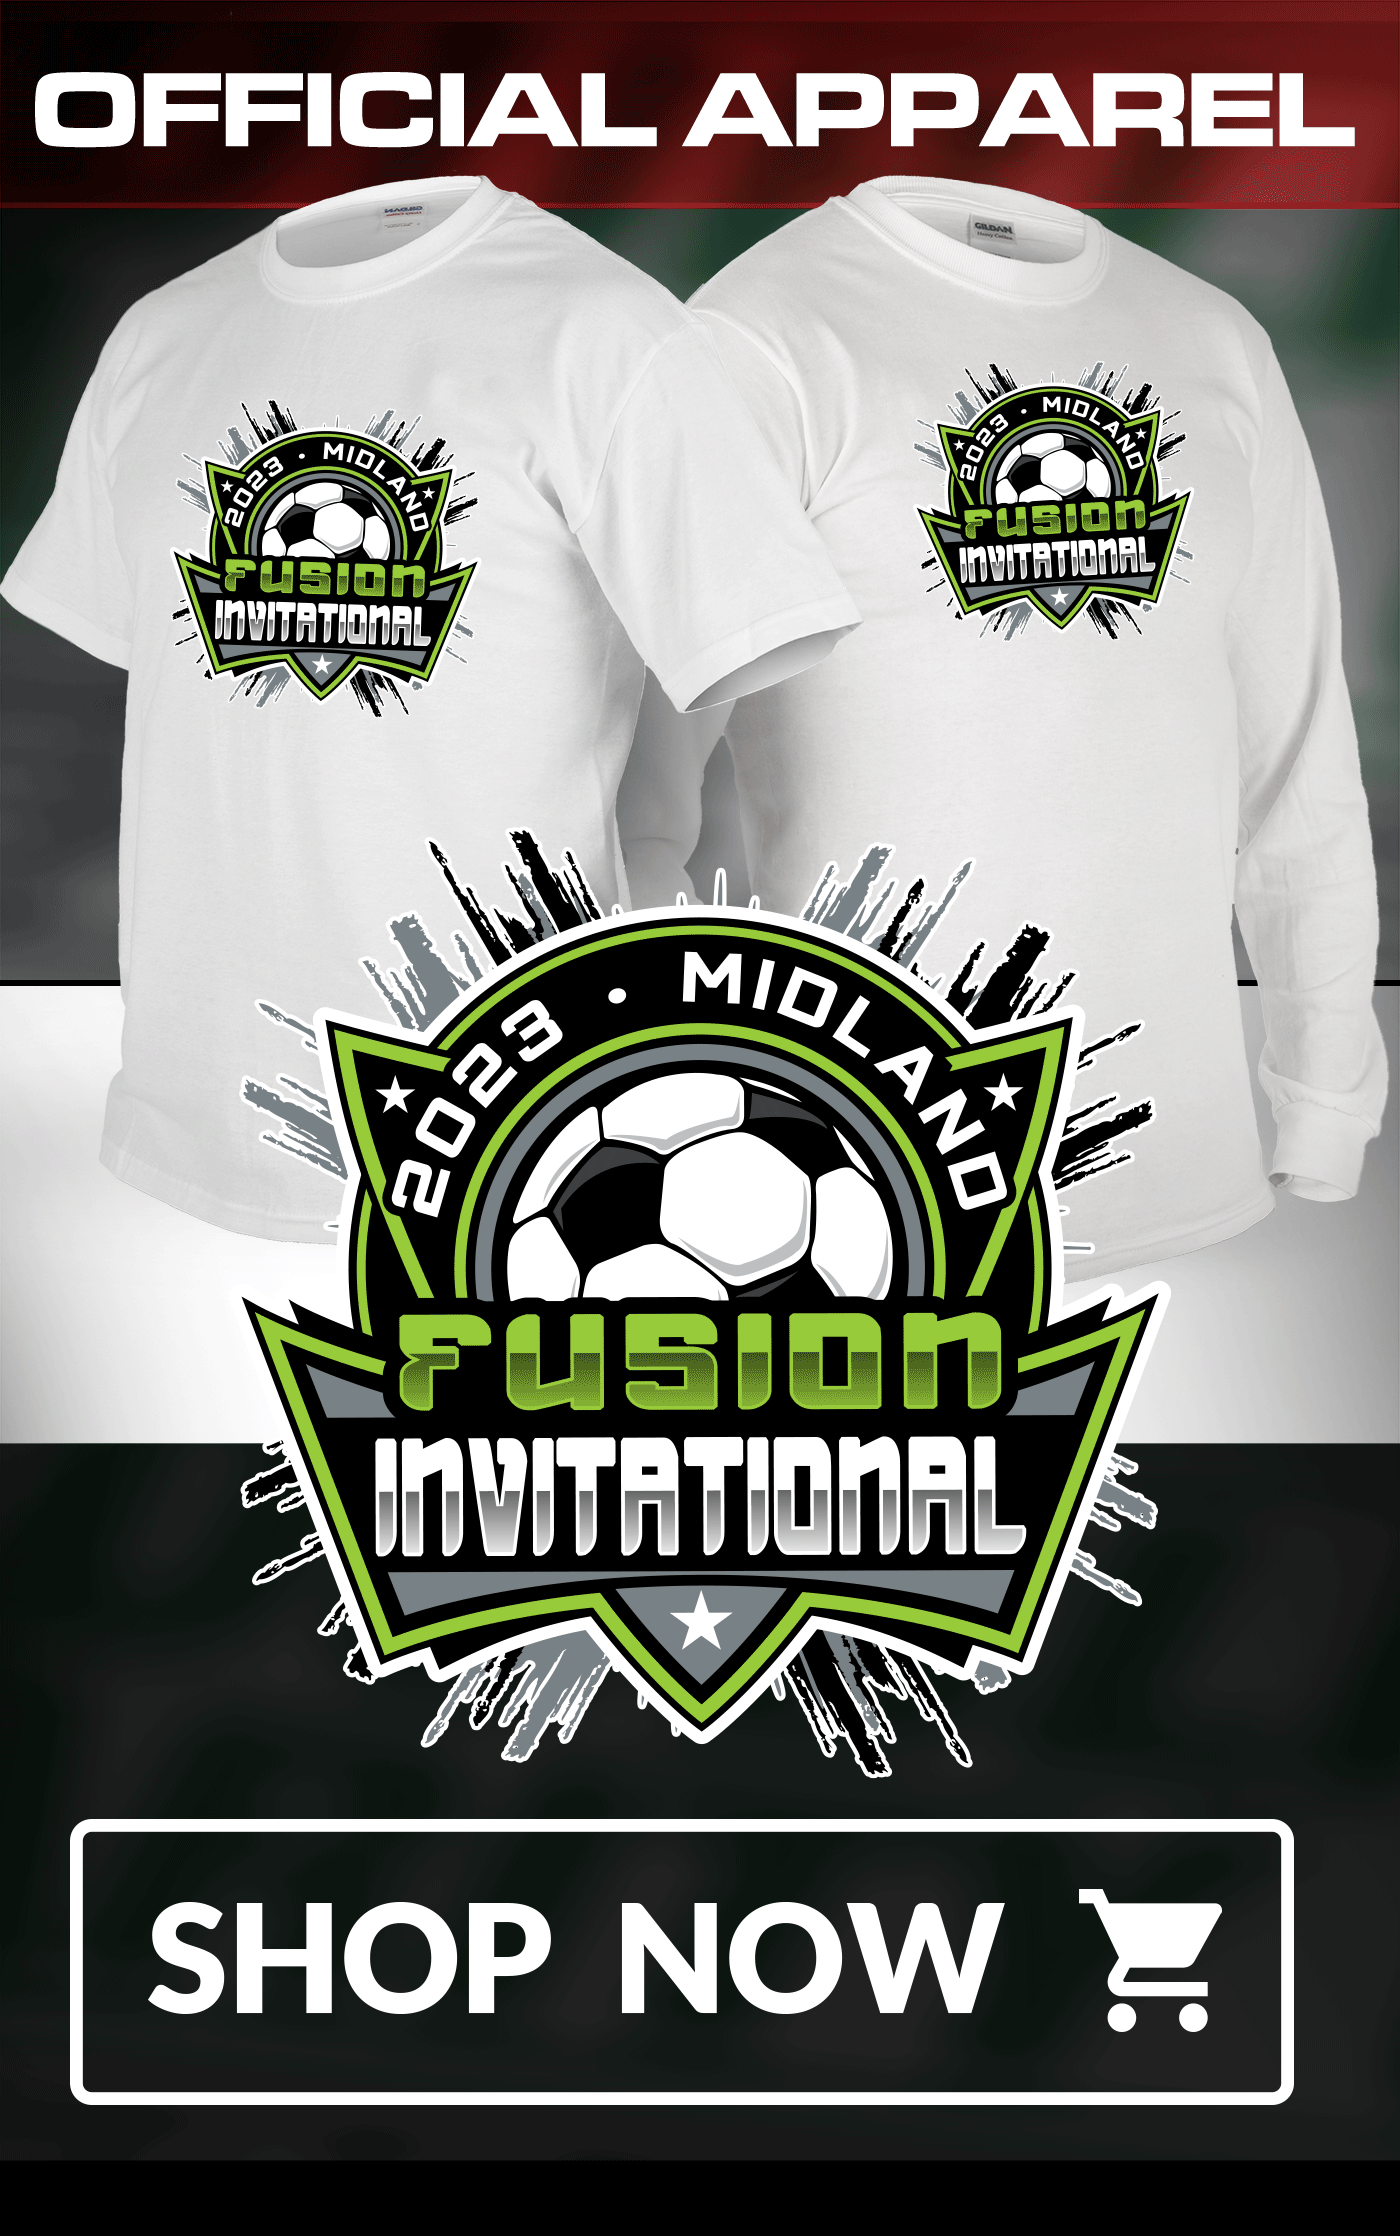 Get your Tournament Gear!